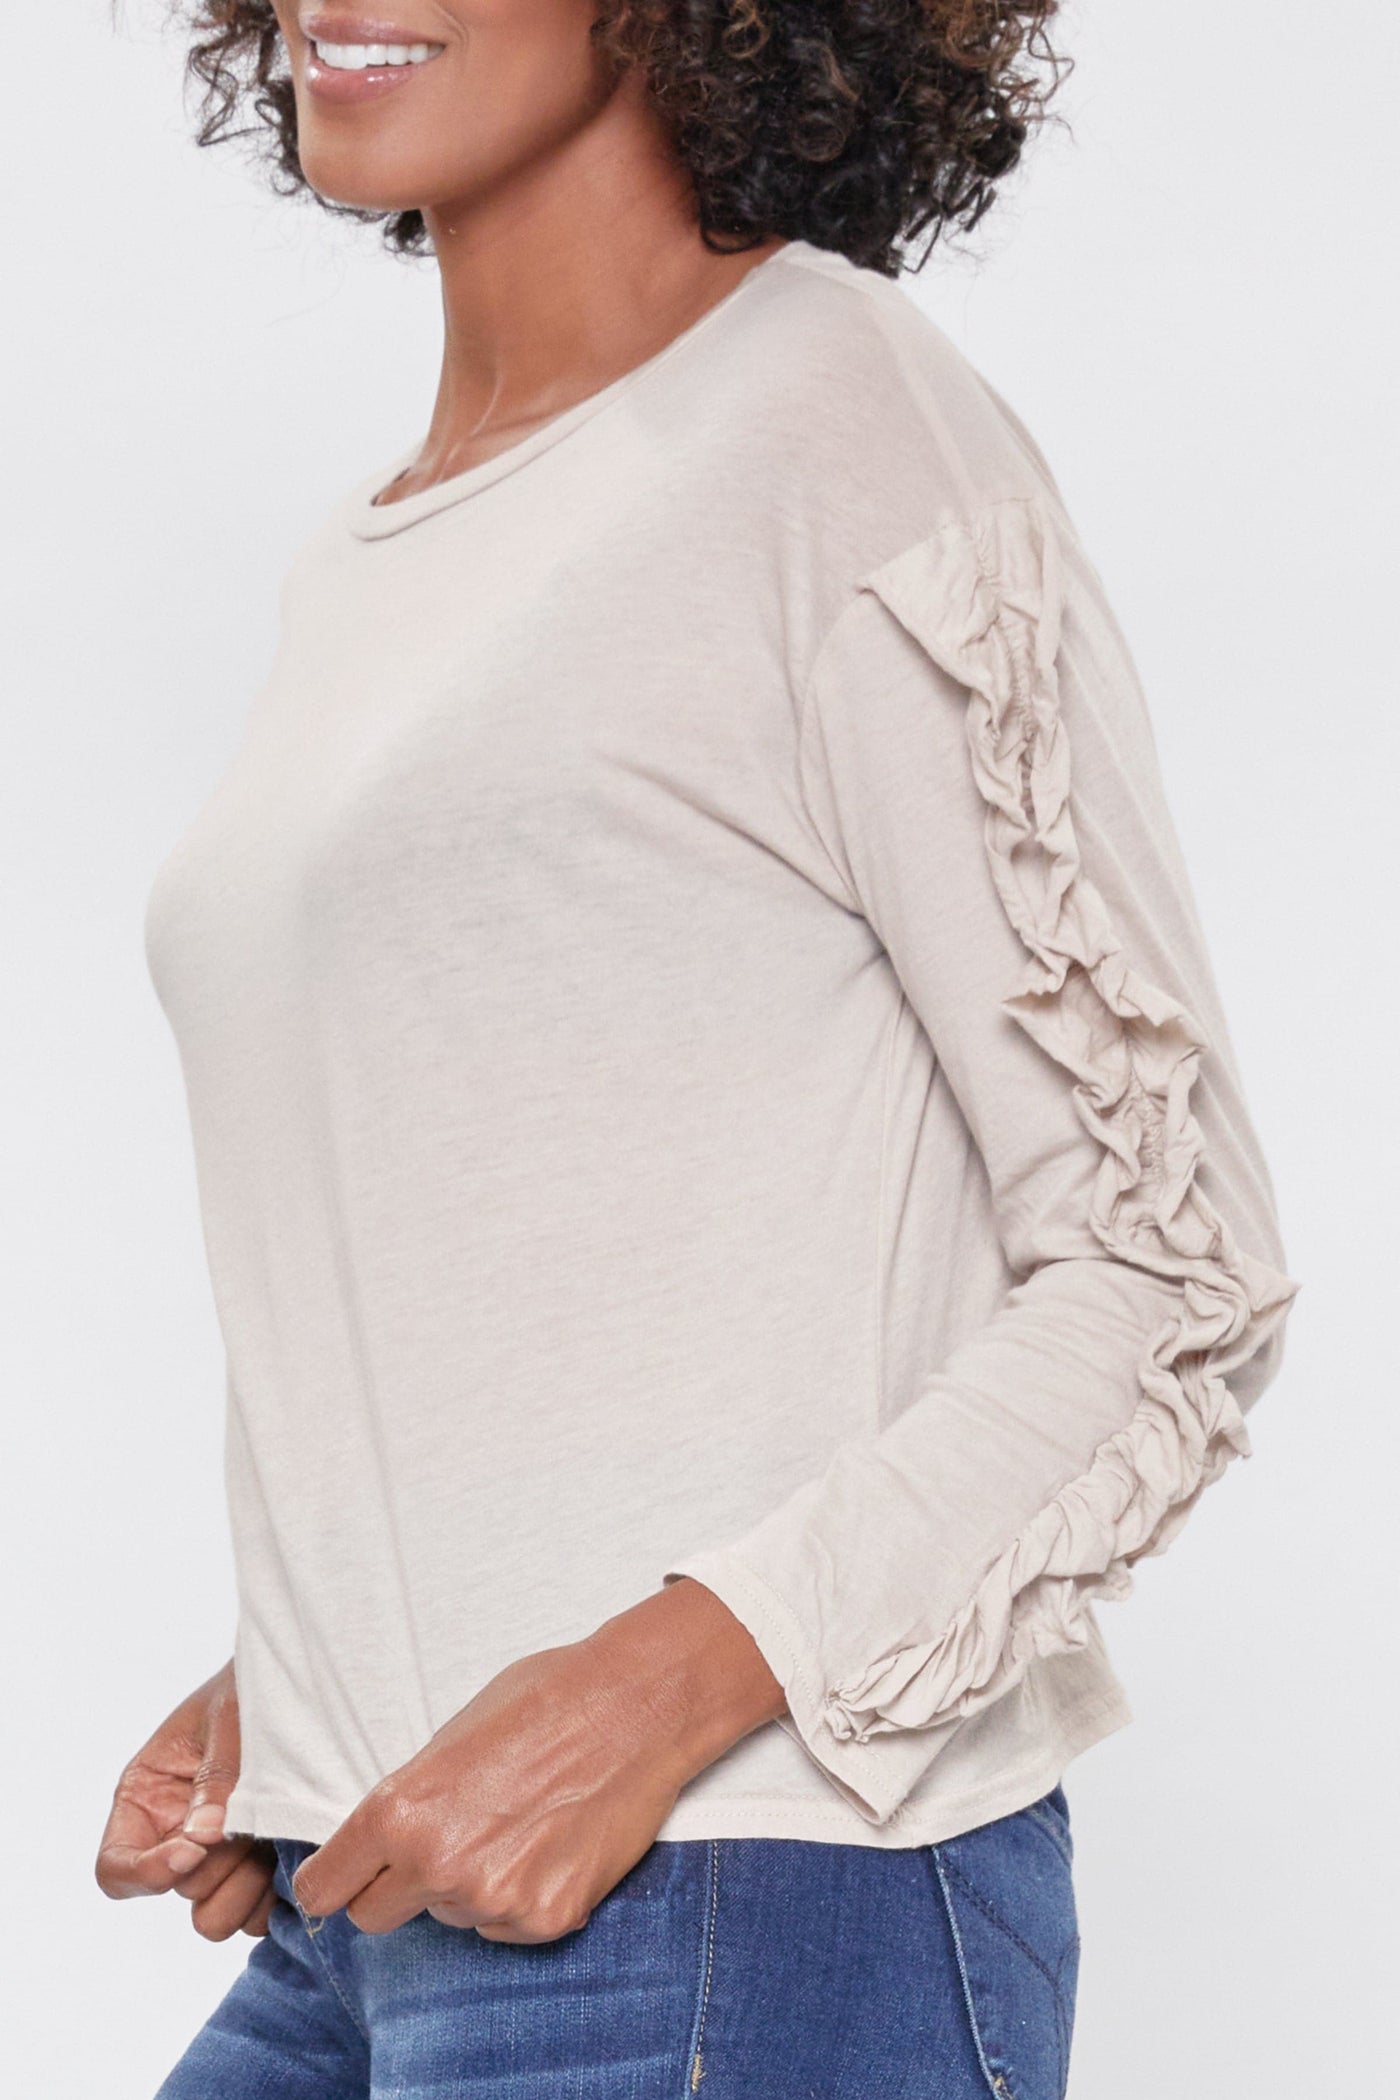 Women's Long Sleeve Top With Ruffled Sleeves Deal-Sale